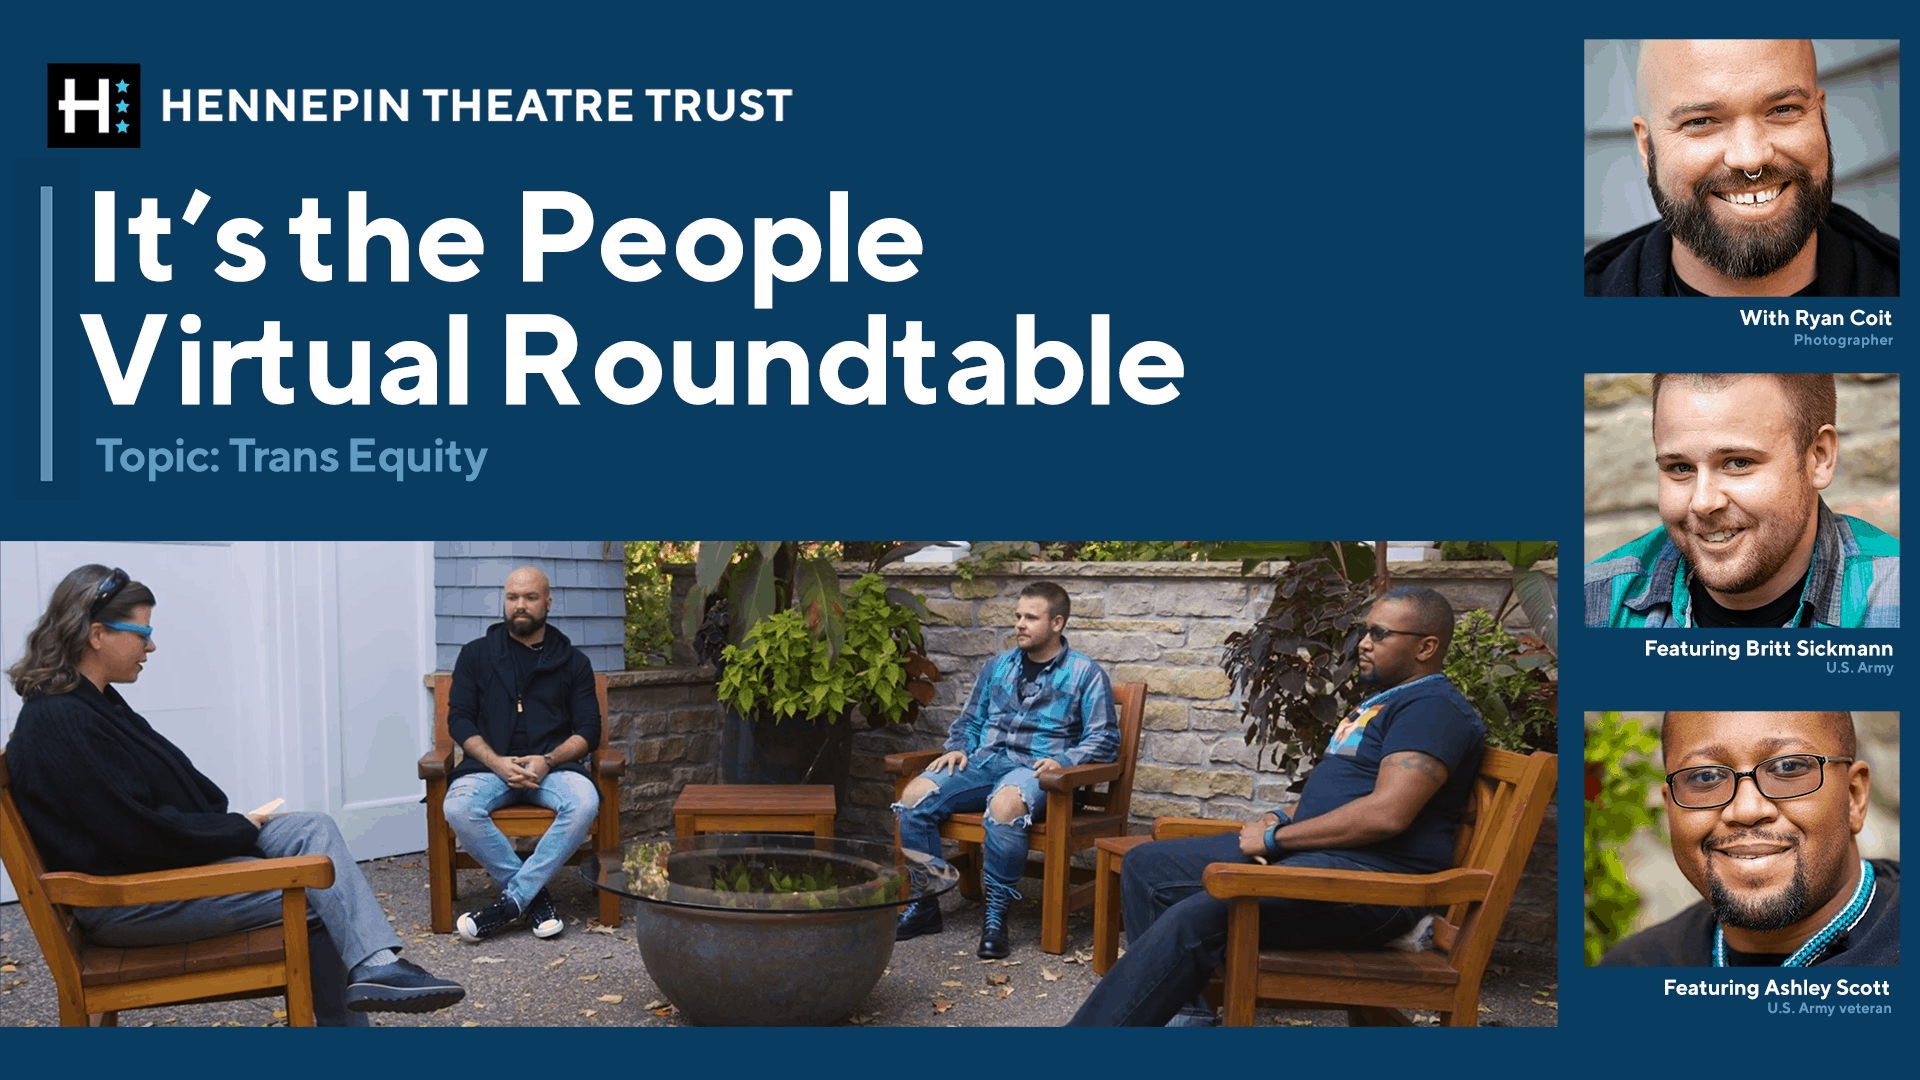 it's the people virtual roundtable featuring ryan coit